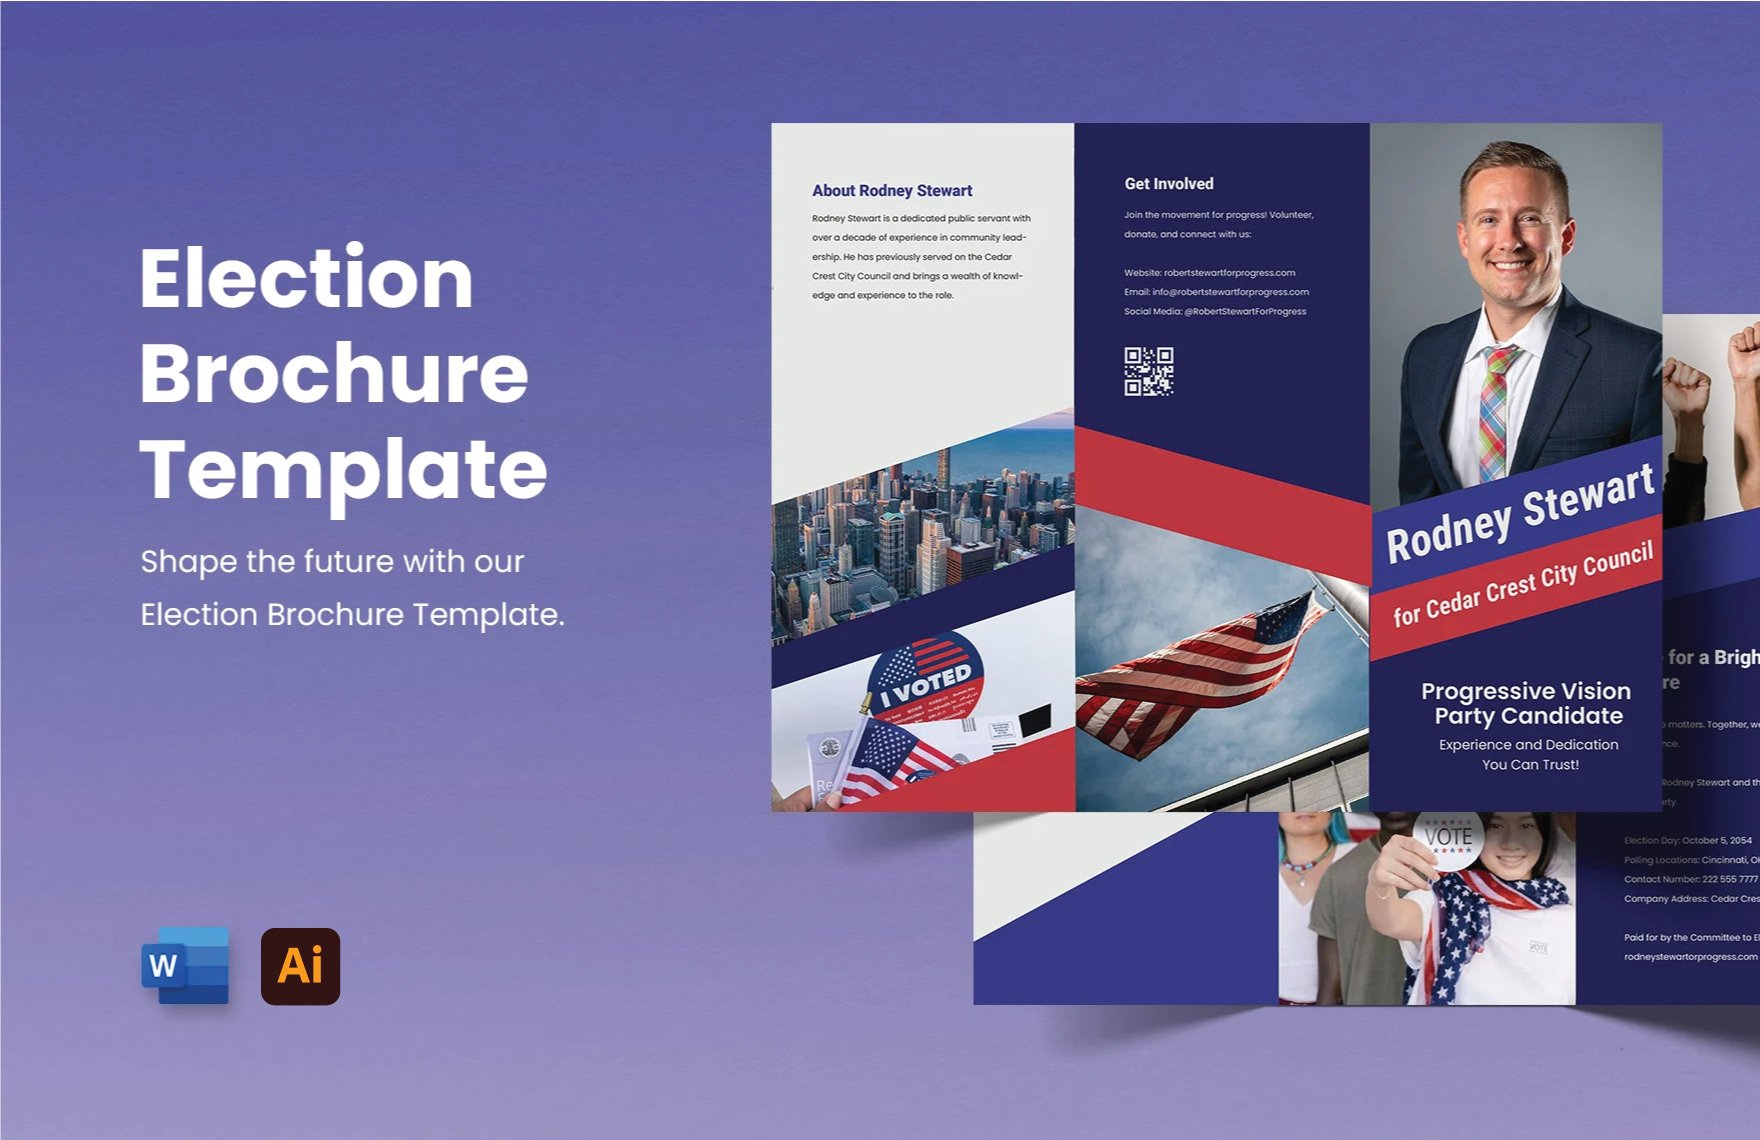 Election Brochure Template in Word, Illustrator